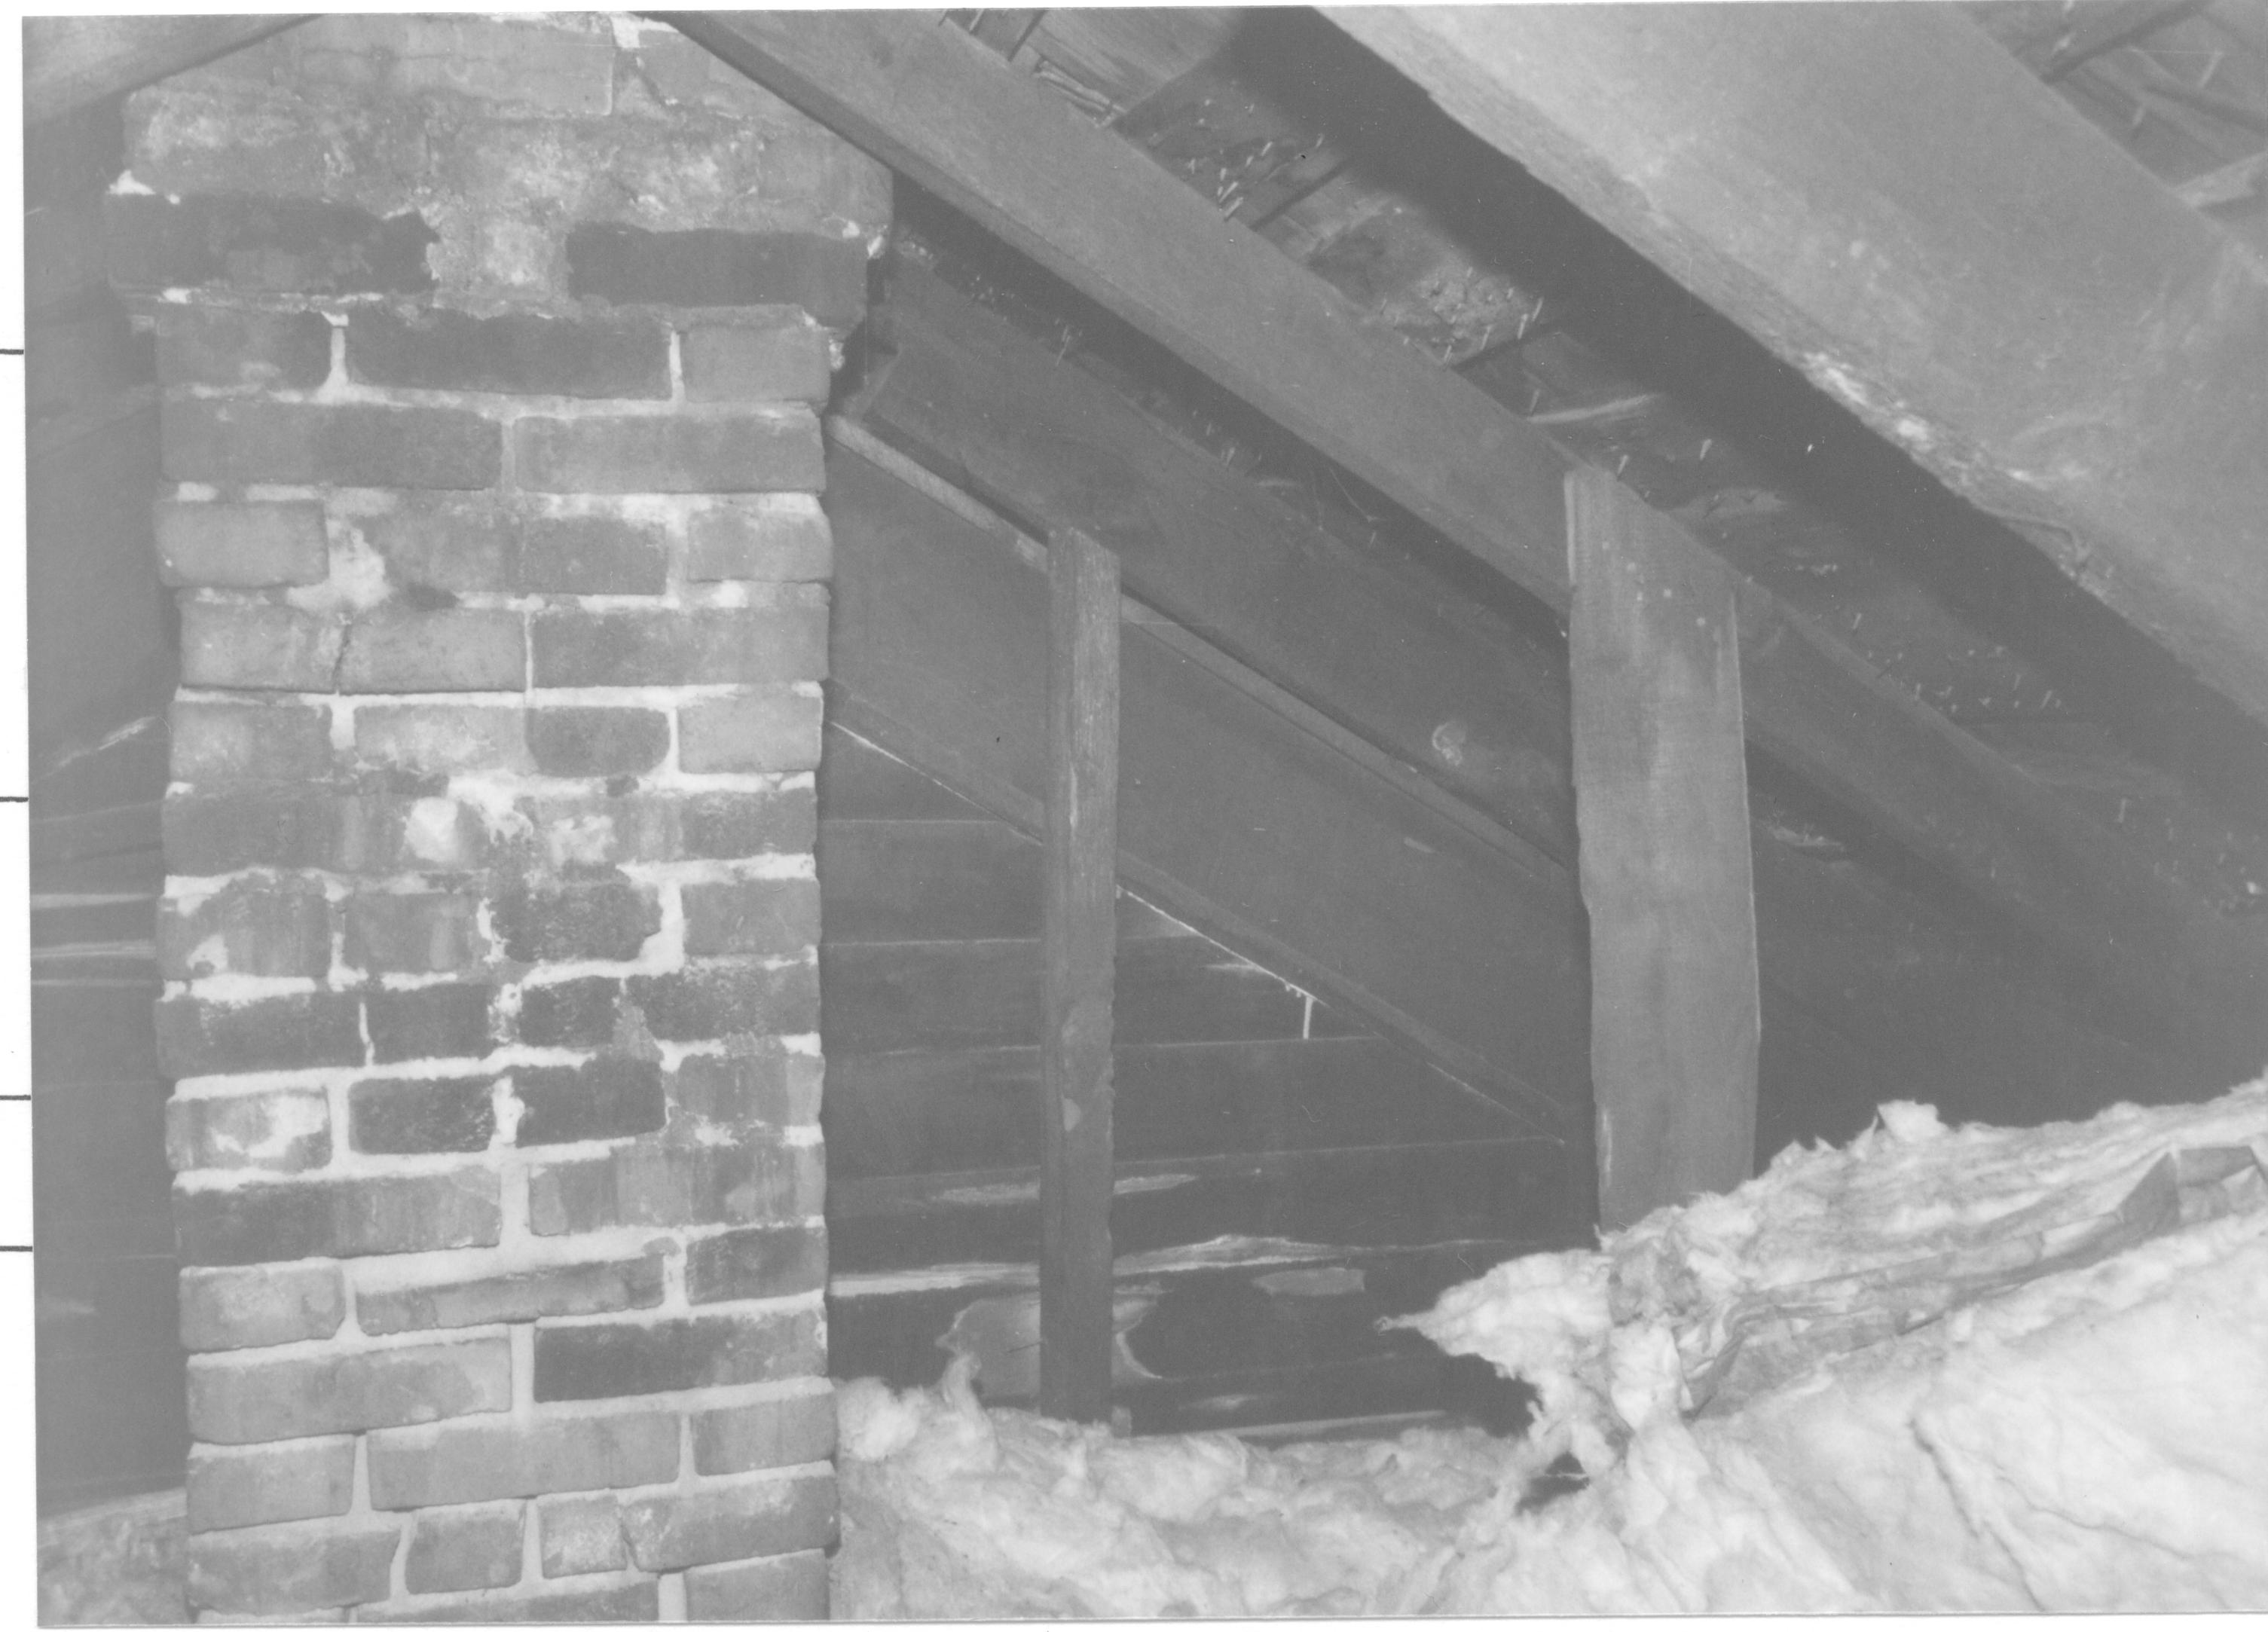 Morse House HS-9 13-12; Room 302, View - West, Attic Morse House, Interior